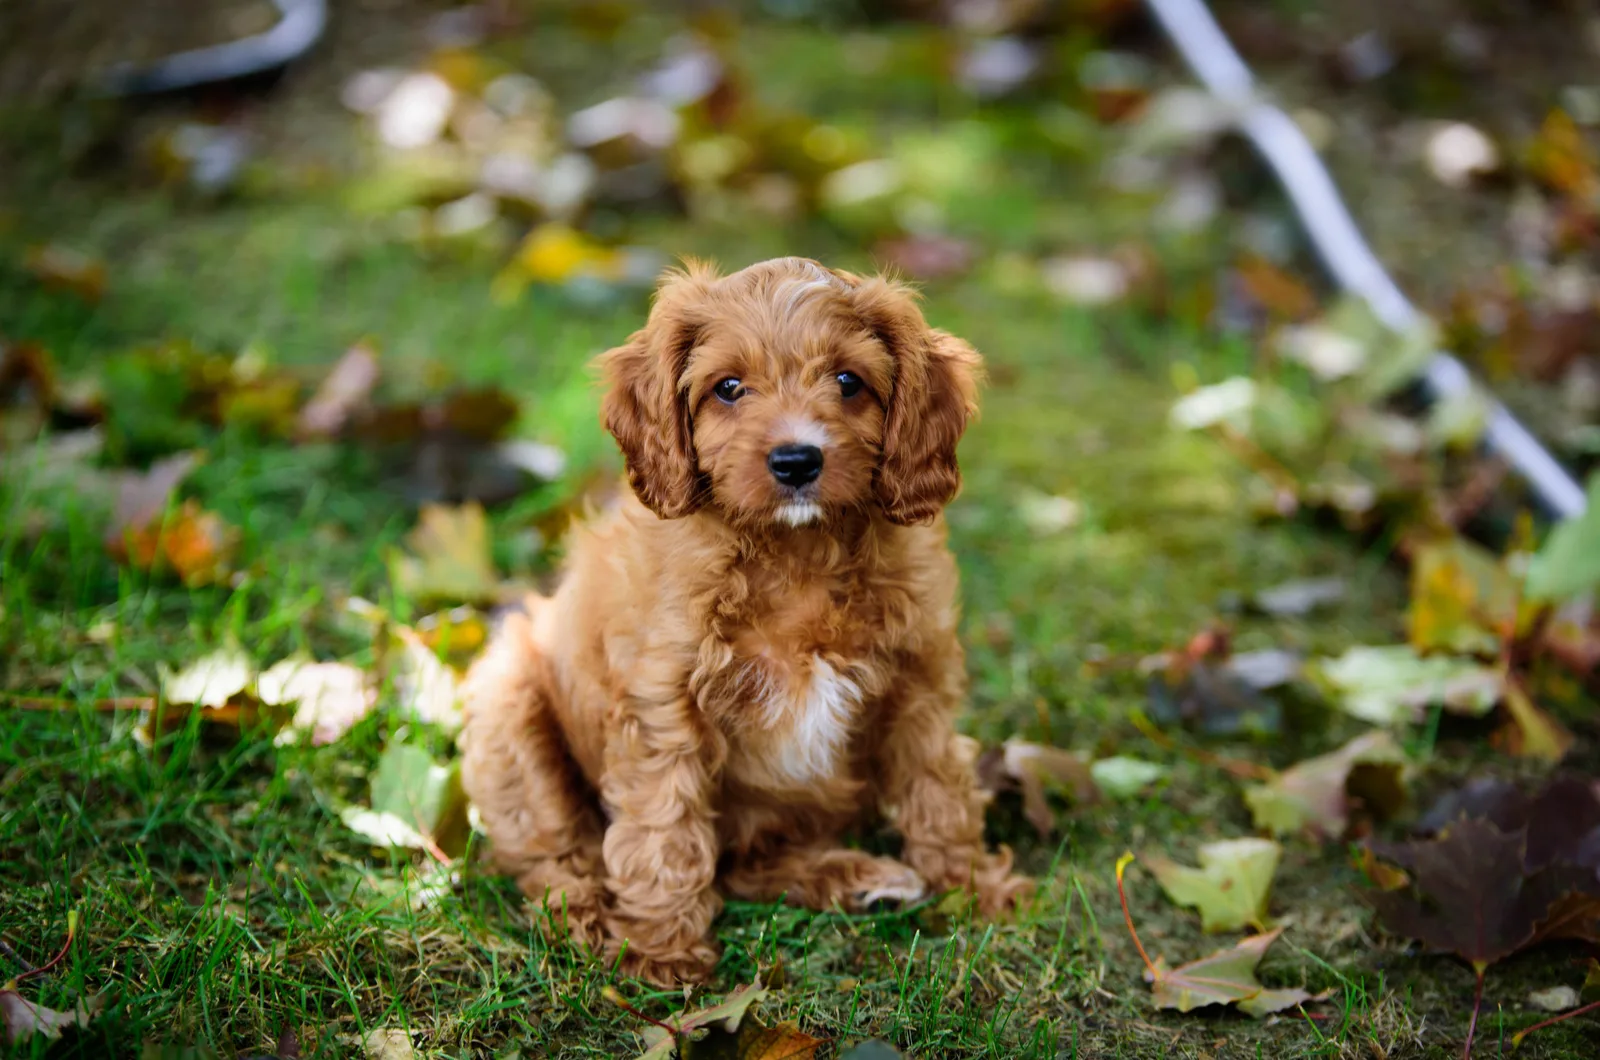 Cavapoo is sitting in the grass